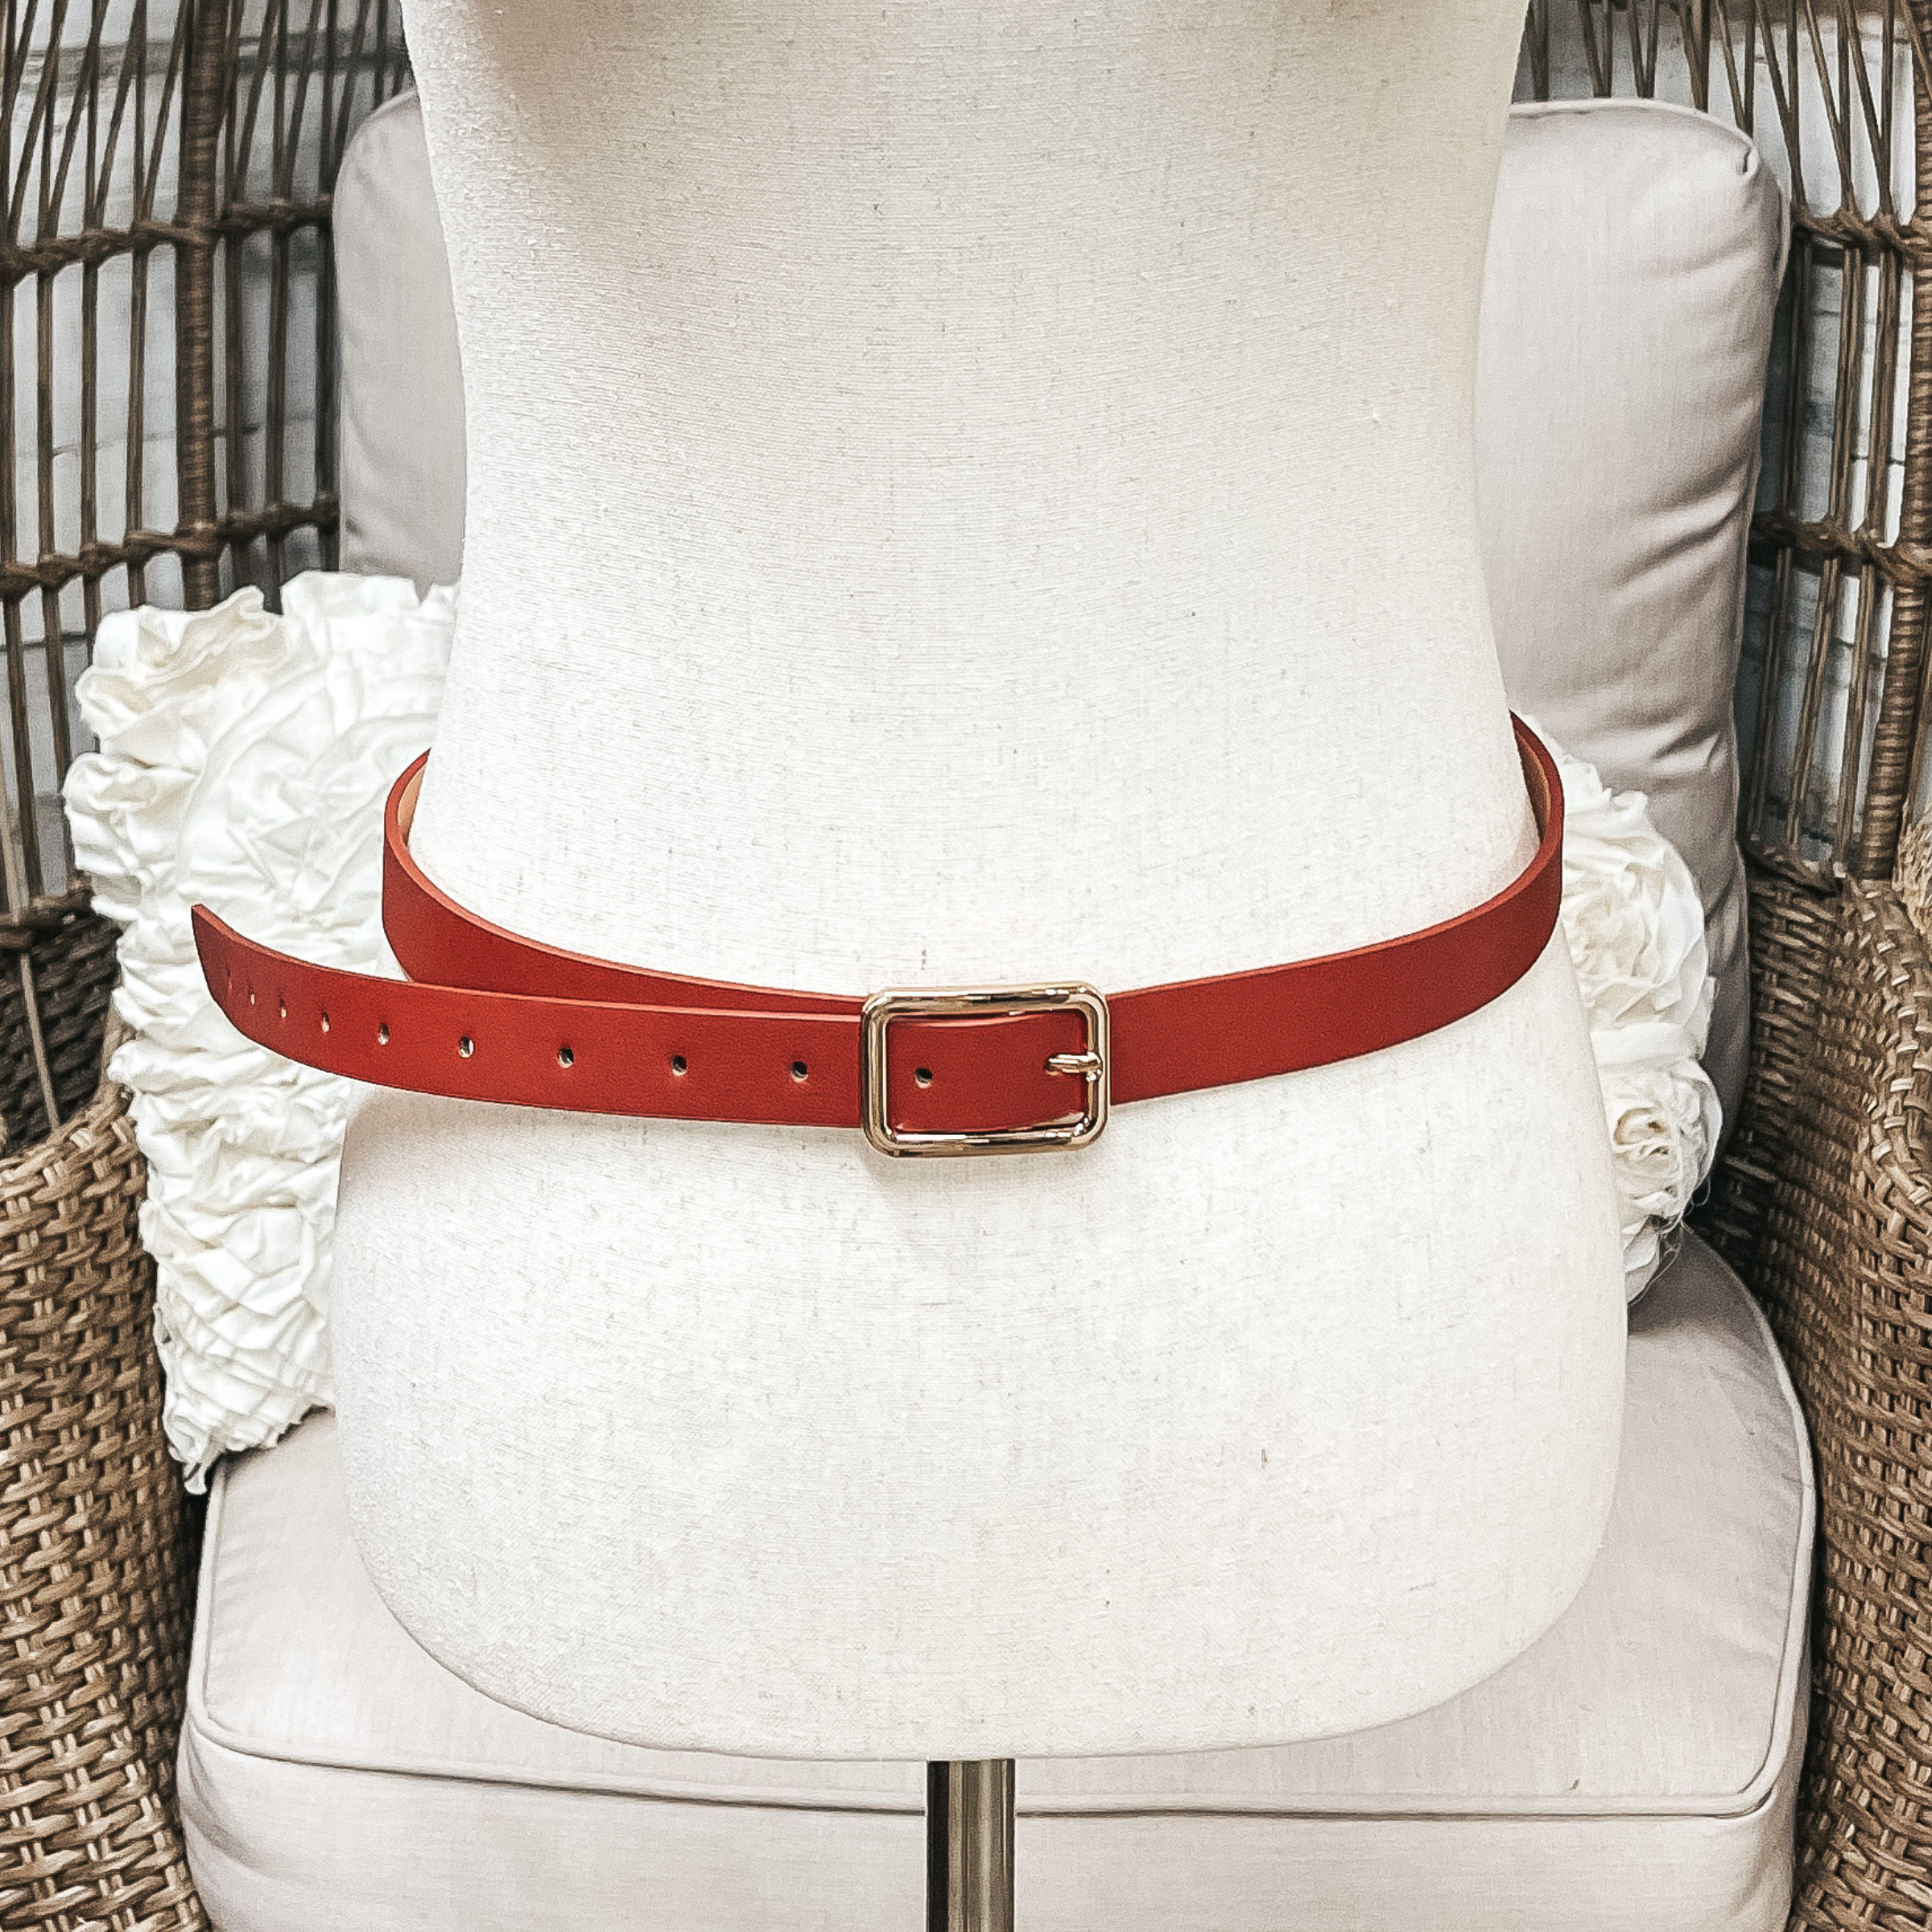 Set of Three | Skinny Fashion Belts in Burgundy, Cognac, and Forest Green - Giddy Up Glamour Boutique